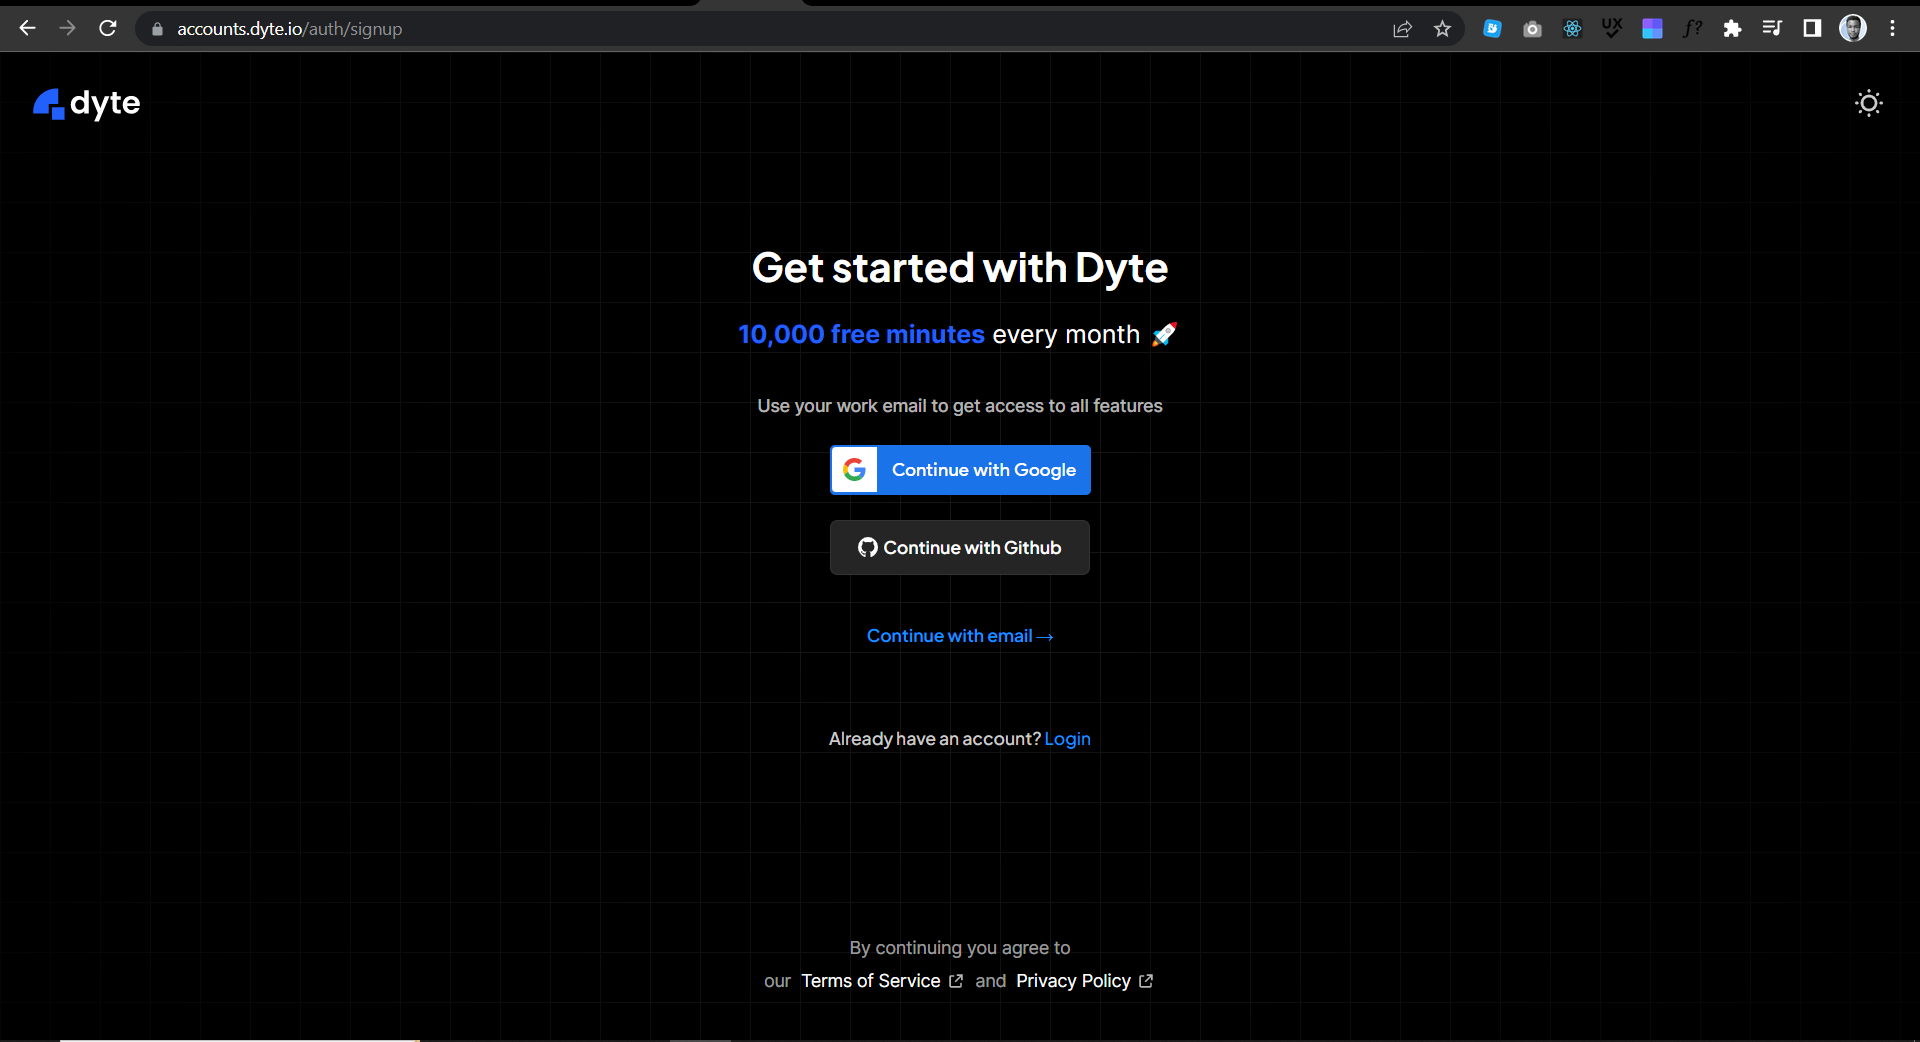 sign up page for a free Dyte account using your Google or GitHub account